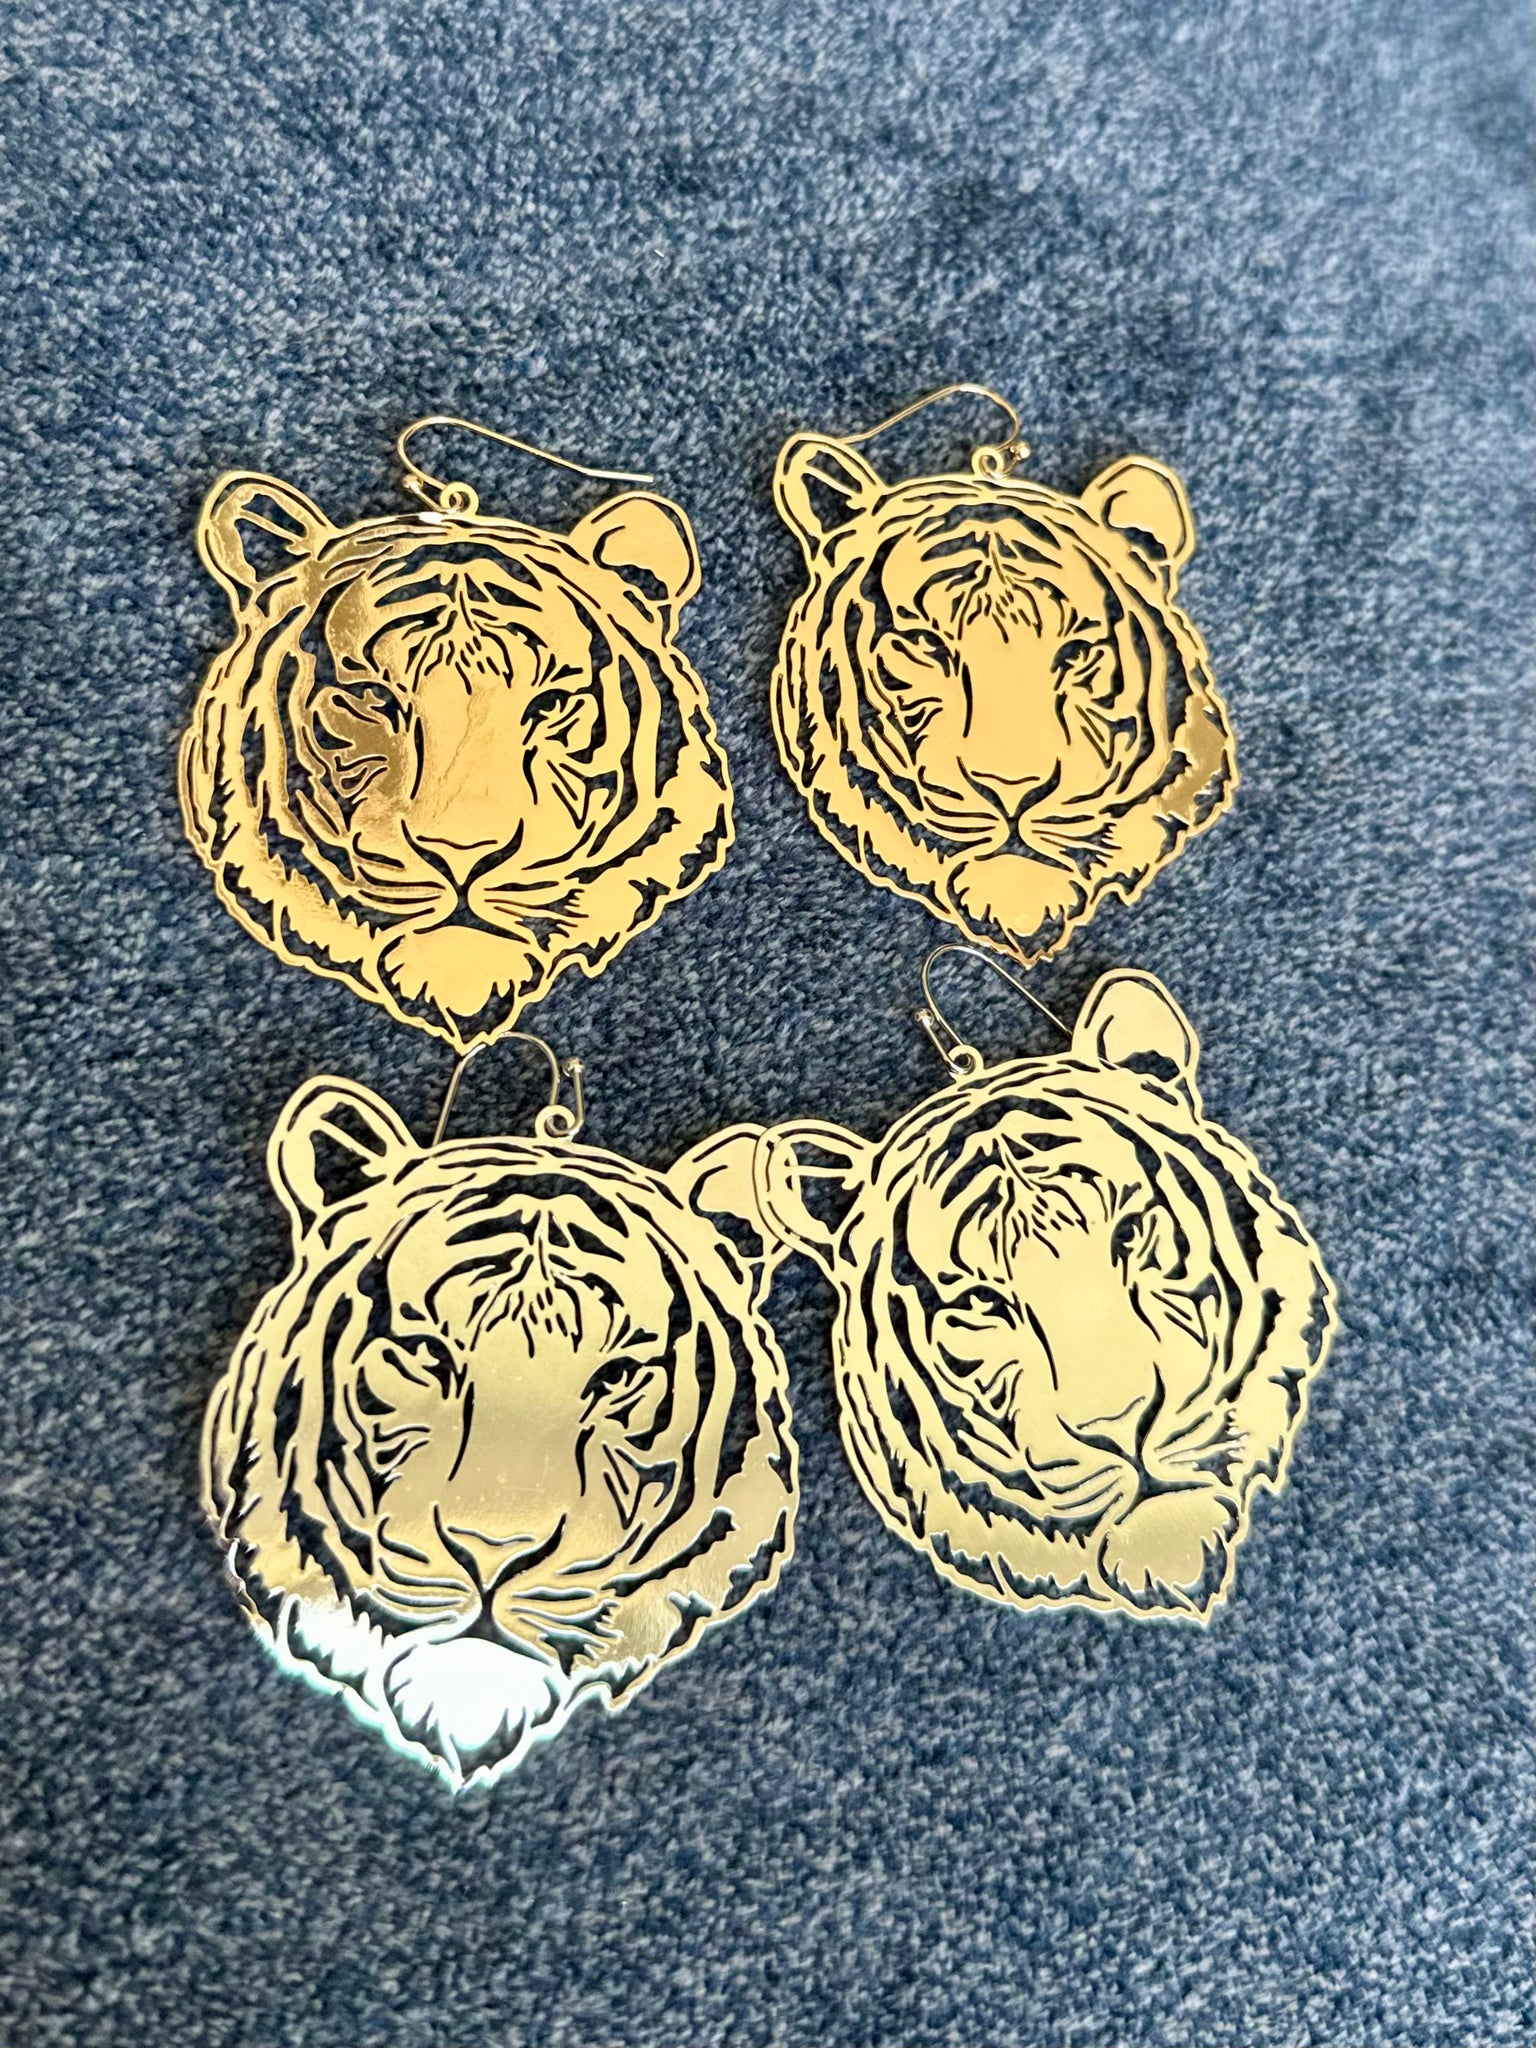 Tiger Earrings - Silver & Gold